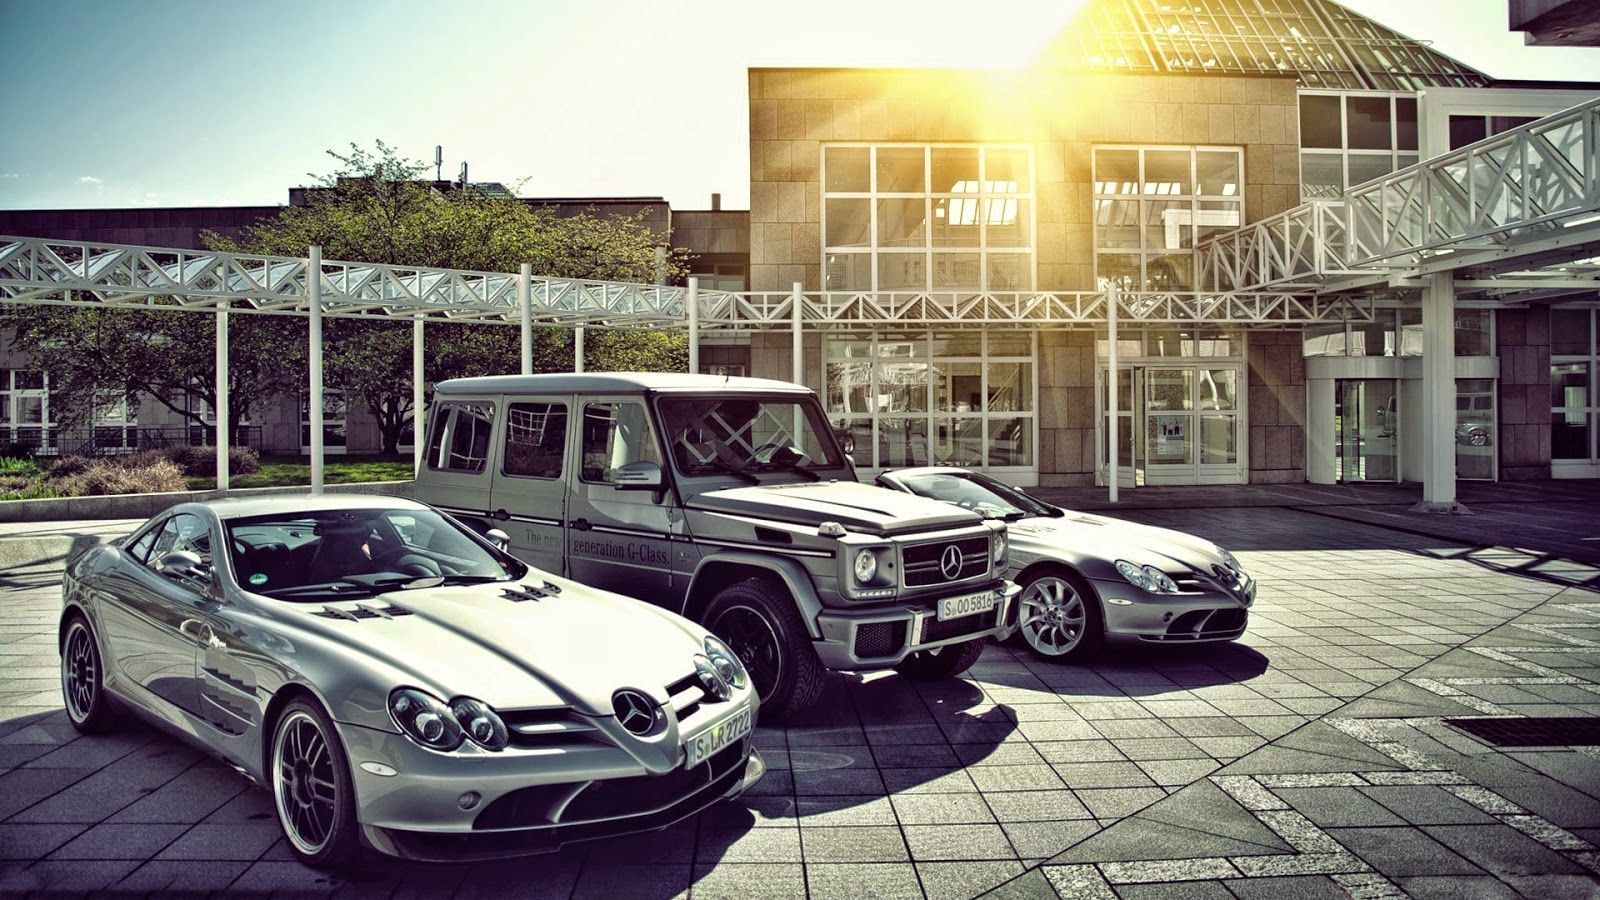 Mercedes cars wallpaper for free download about wallpaper. Car